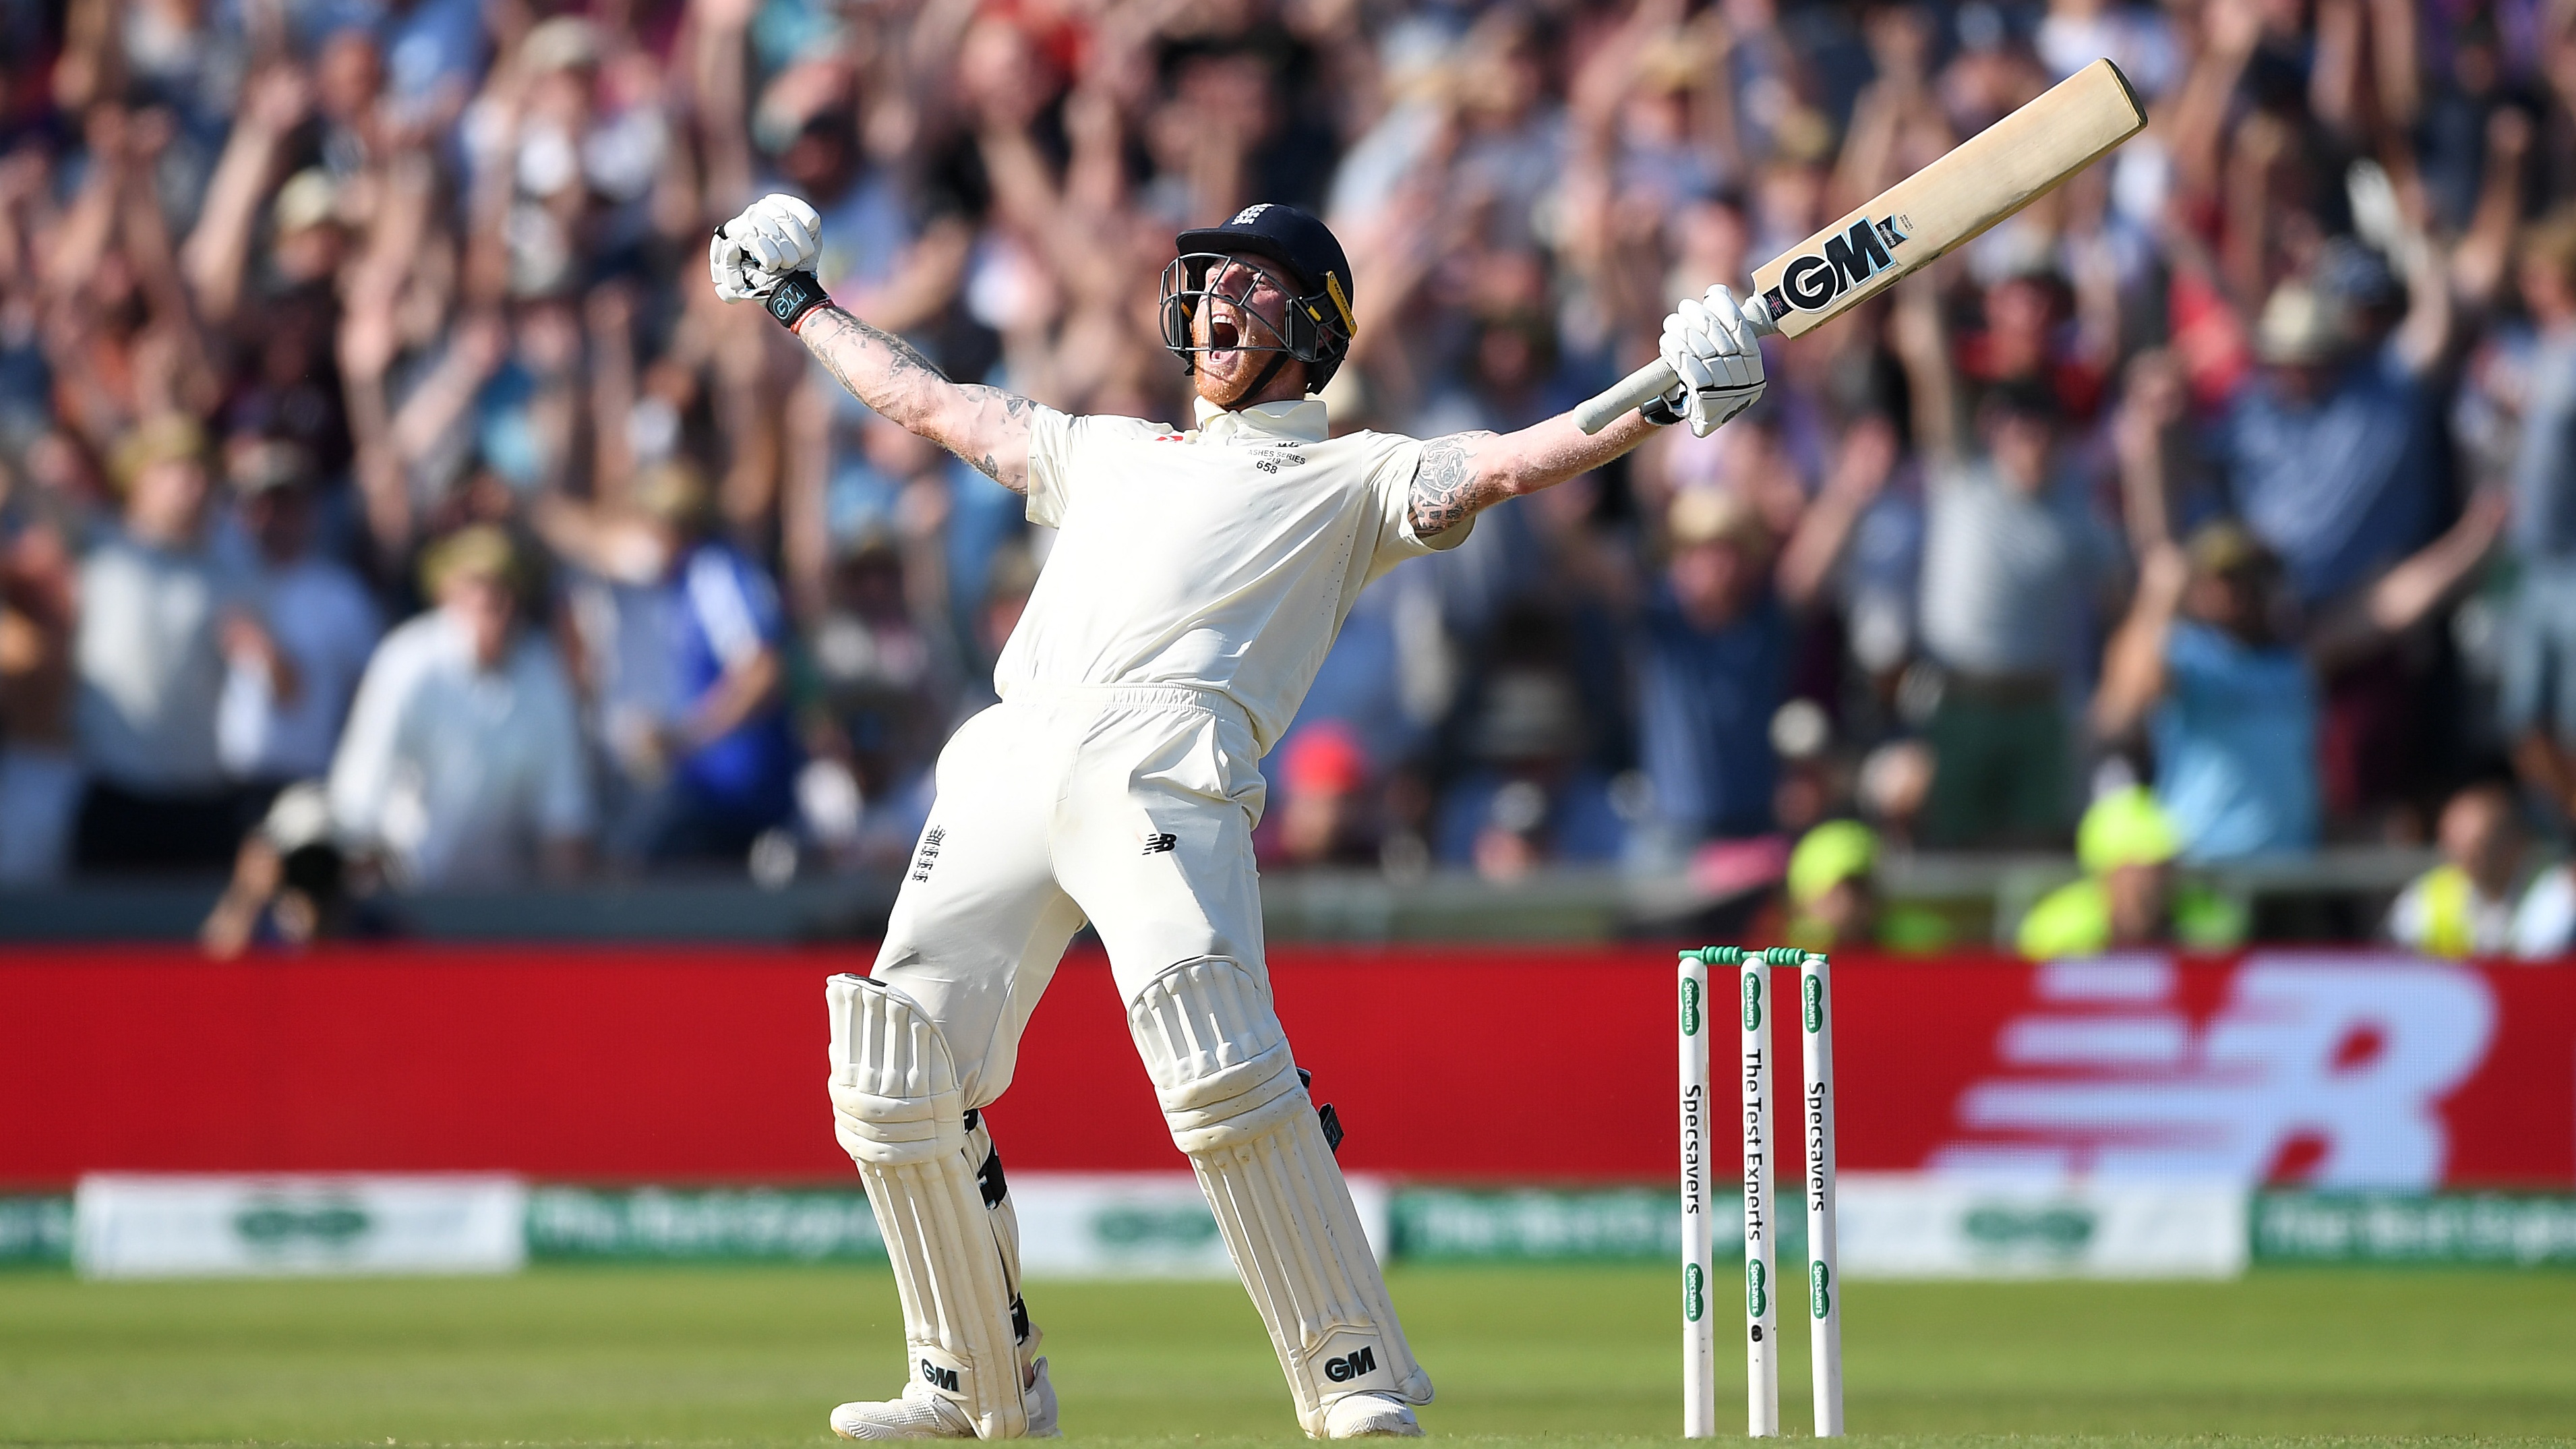 The Ashes free live stream how to watch the 5th Test of England vs Australia, final day, Stuart Broad What Hi-Fi?